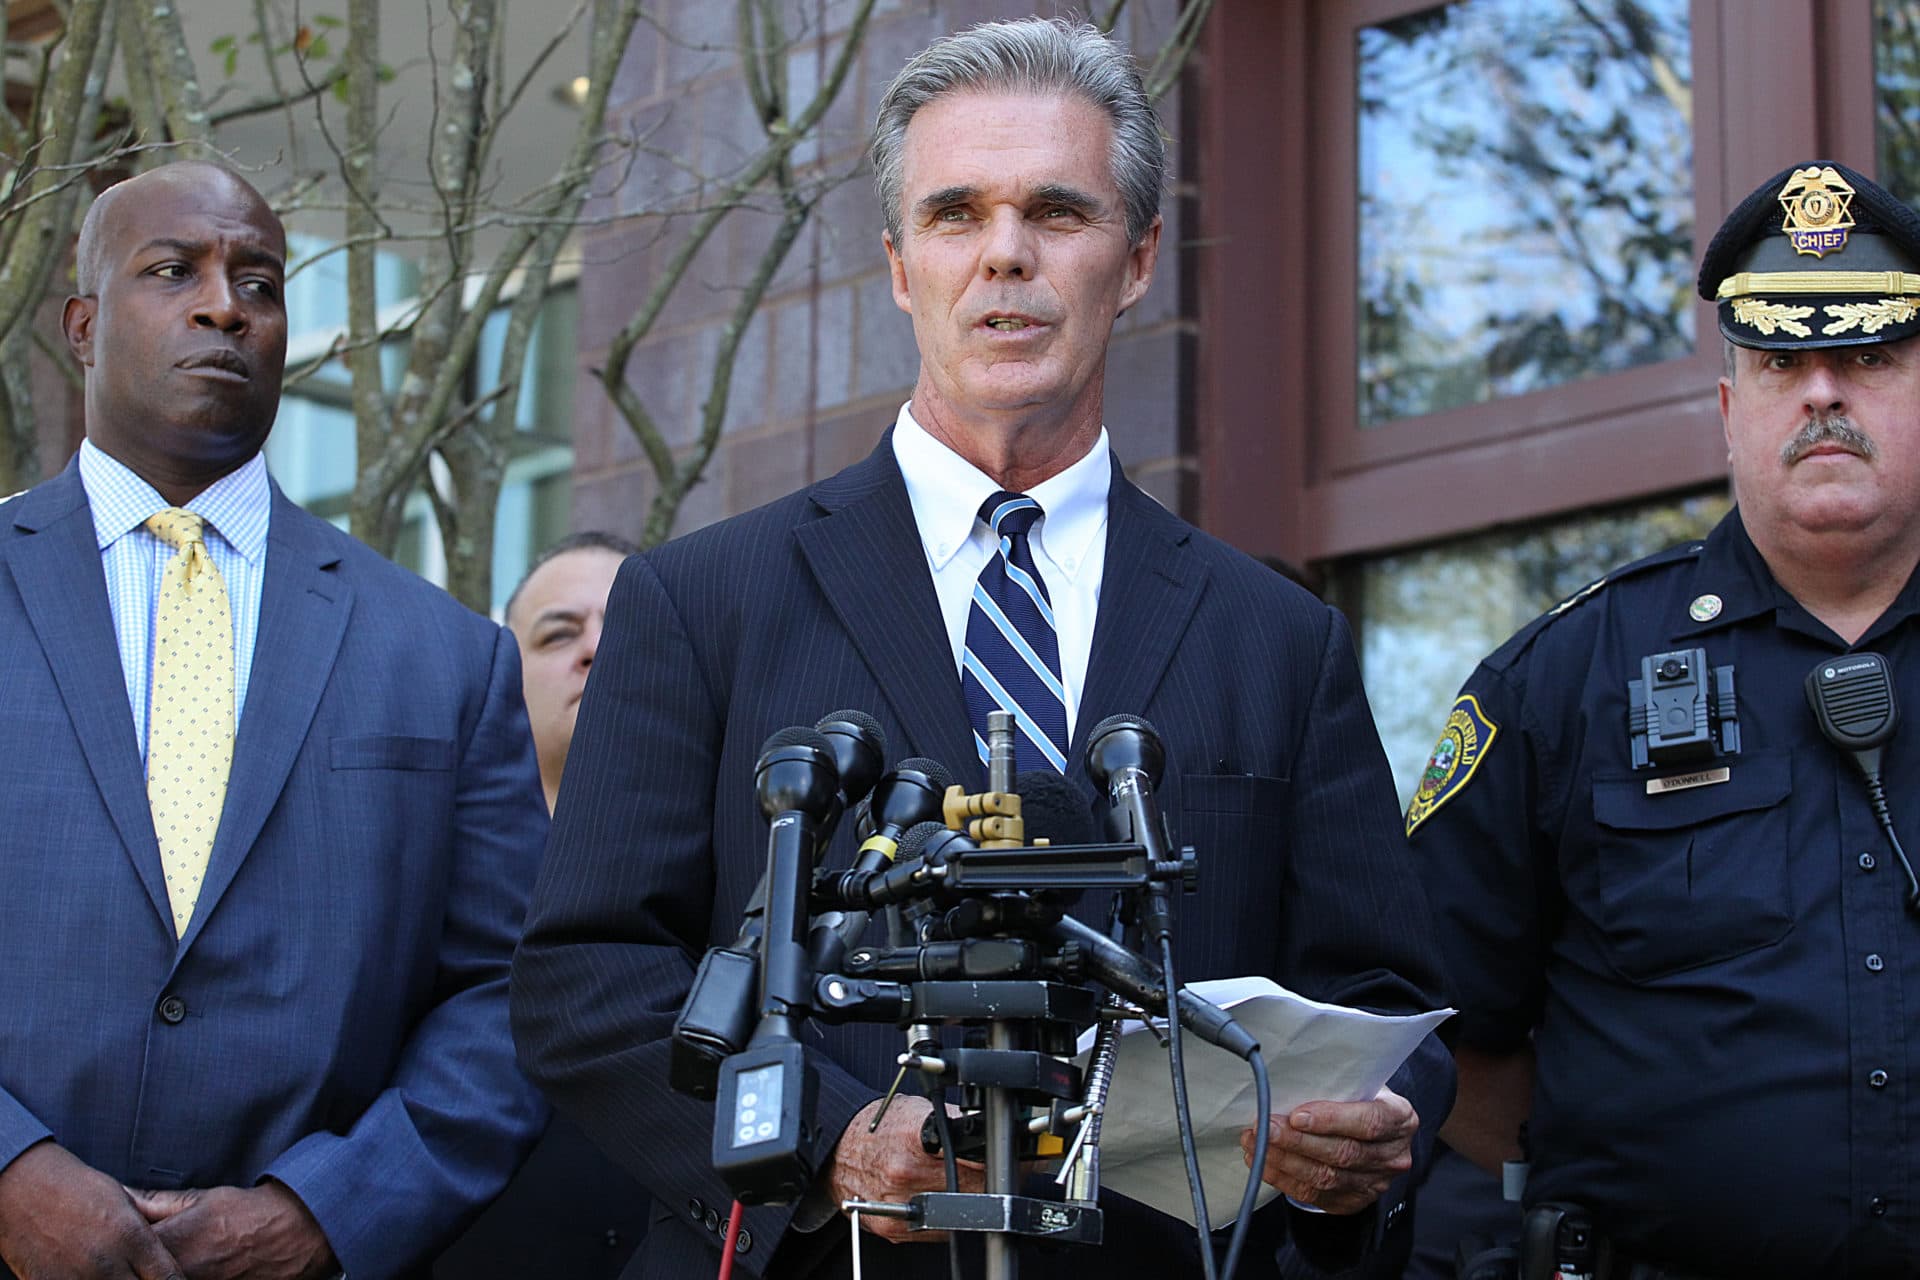 Worcester County District Attorney Joseph D. Early Jr., center, holds a press conference in 2018. (Suzanne Kreiter/The Boston Globe via Getty Images)